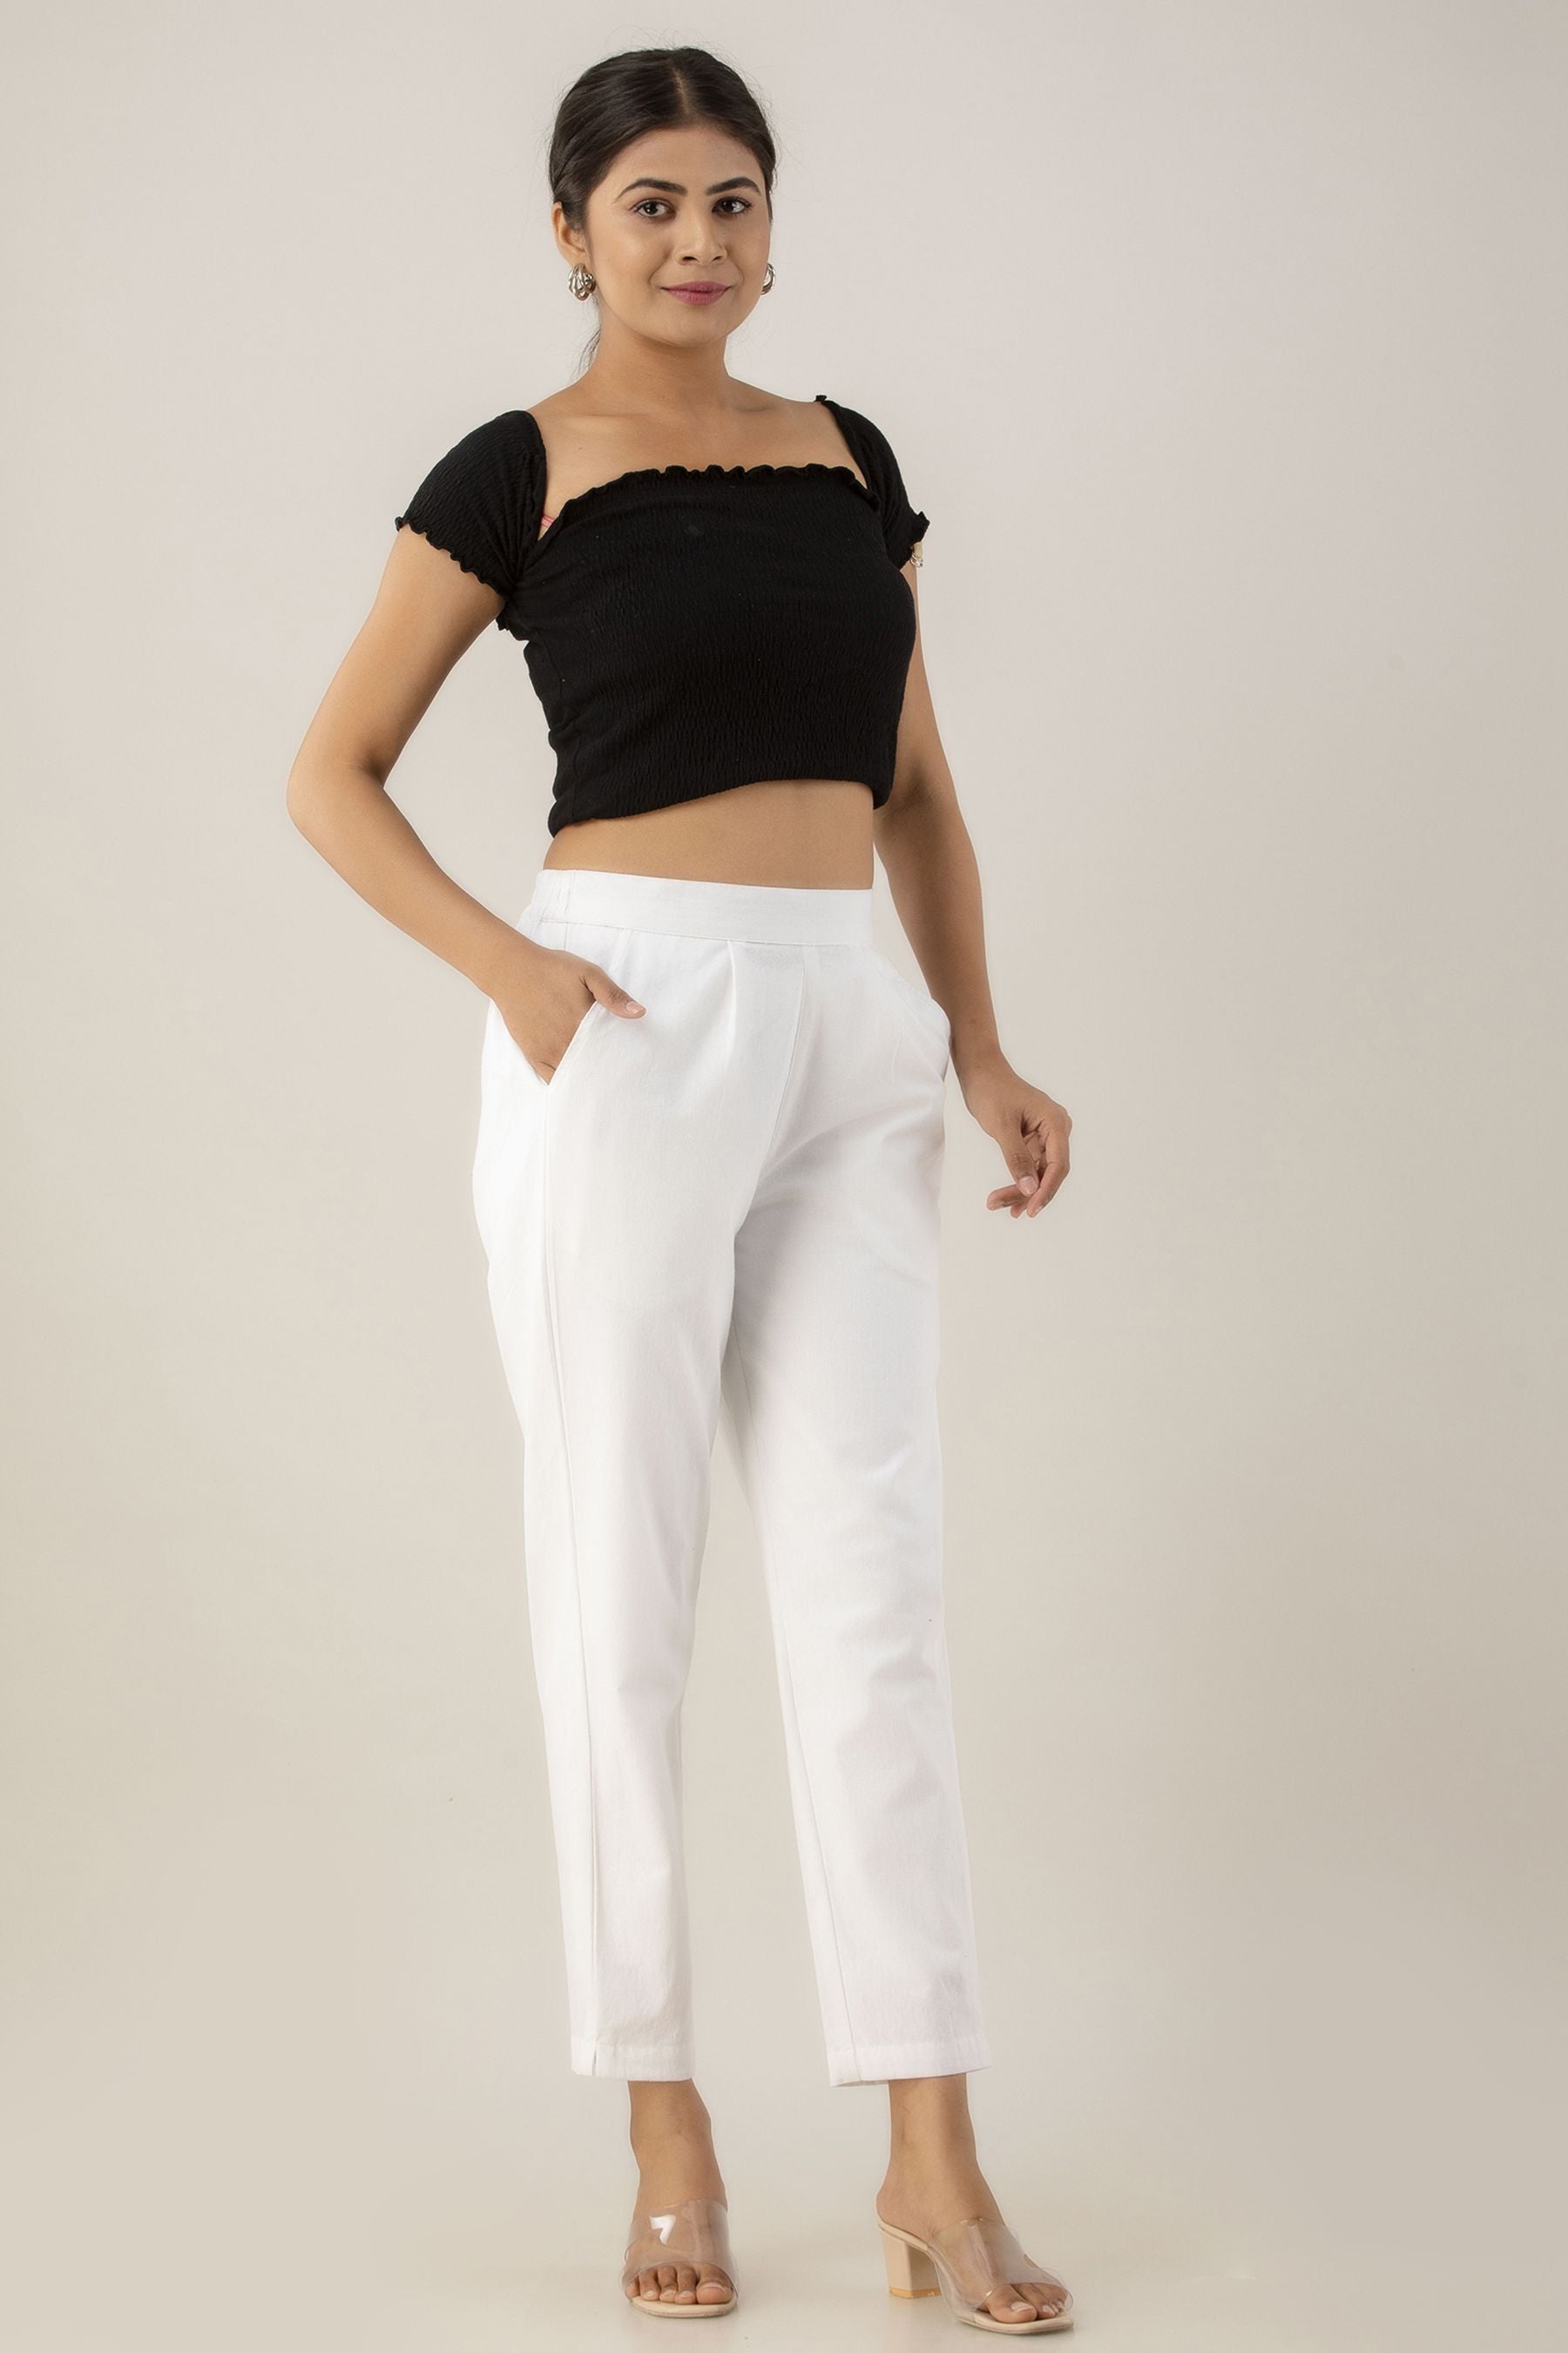 Cigarette Pants Manufacturers, Suppliers, Dealers & Prices